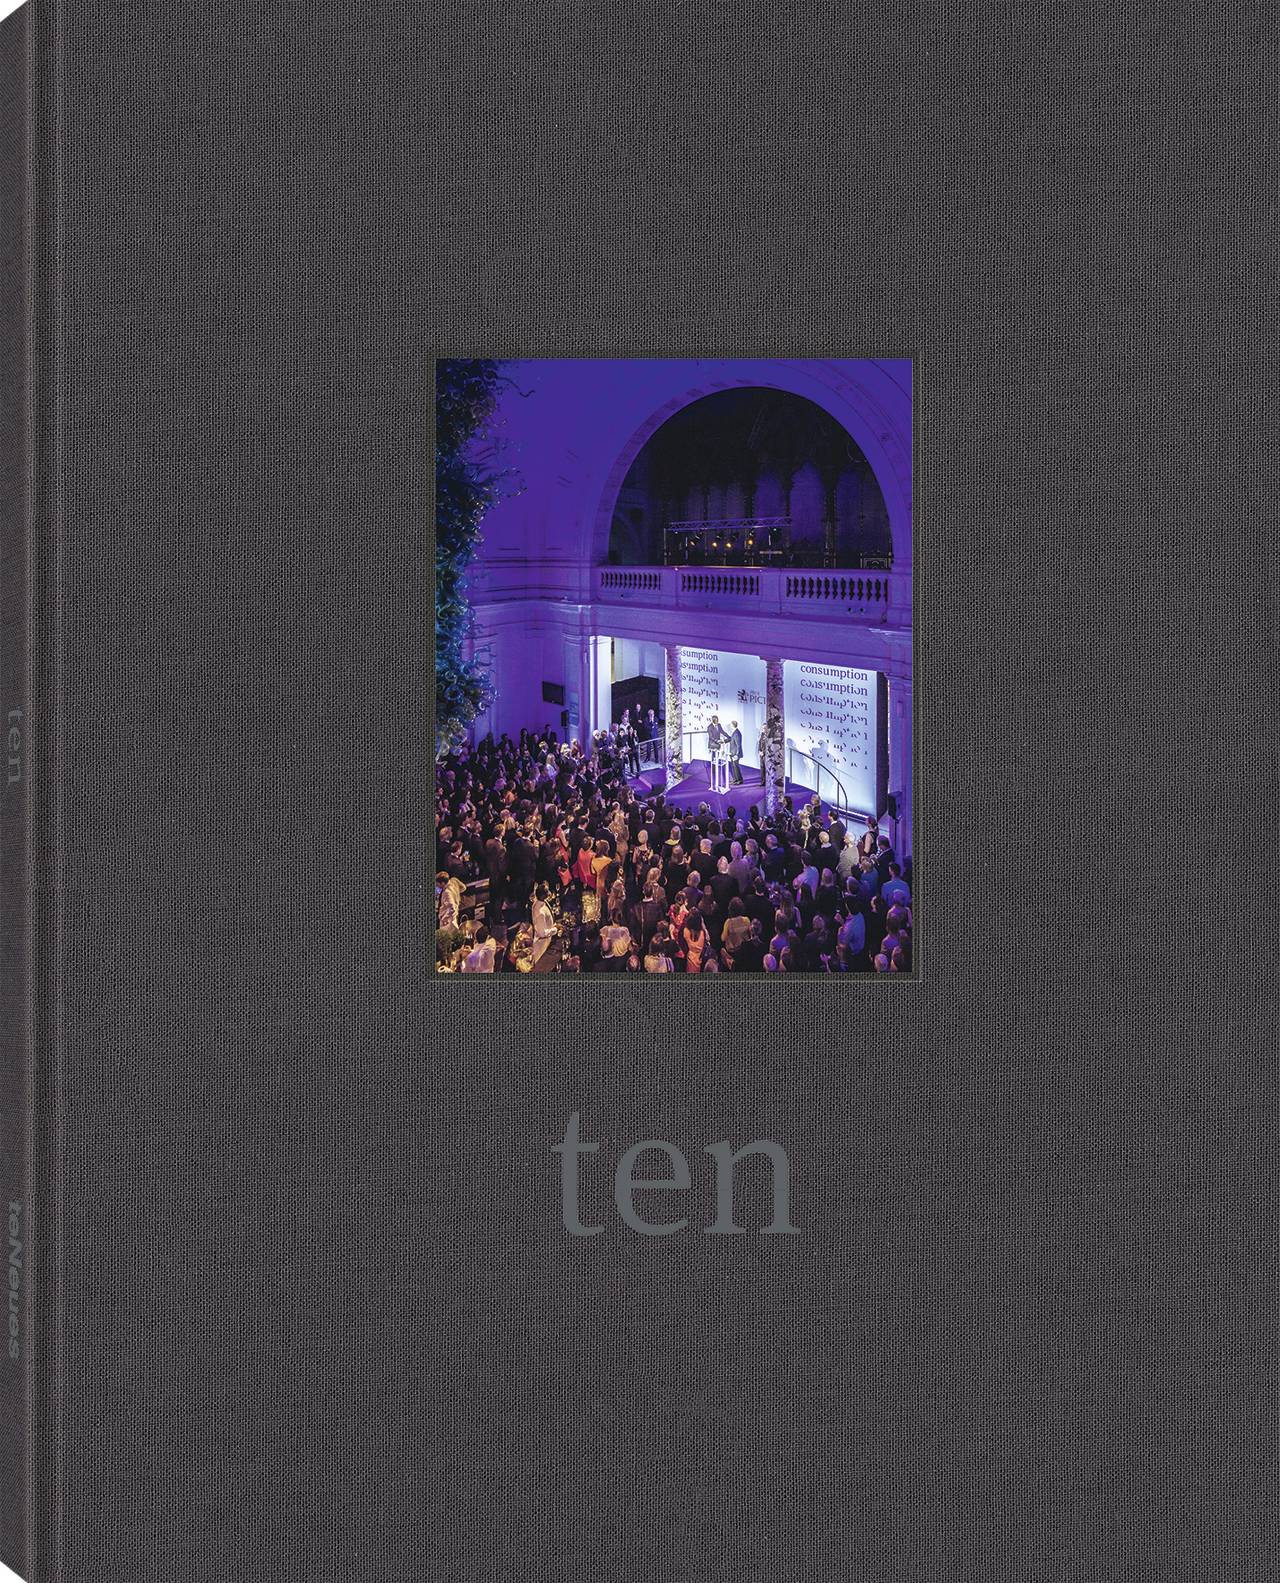 ten by the Prix Pictet sustainability photo competition illustrated book cover